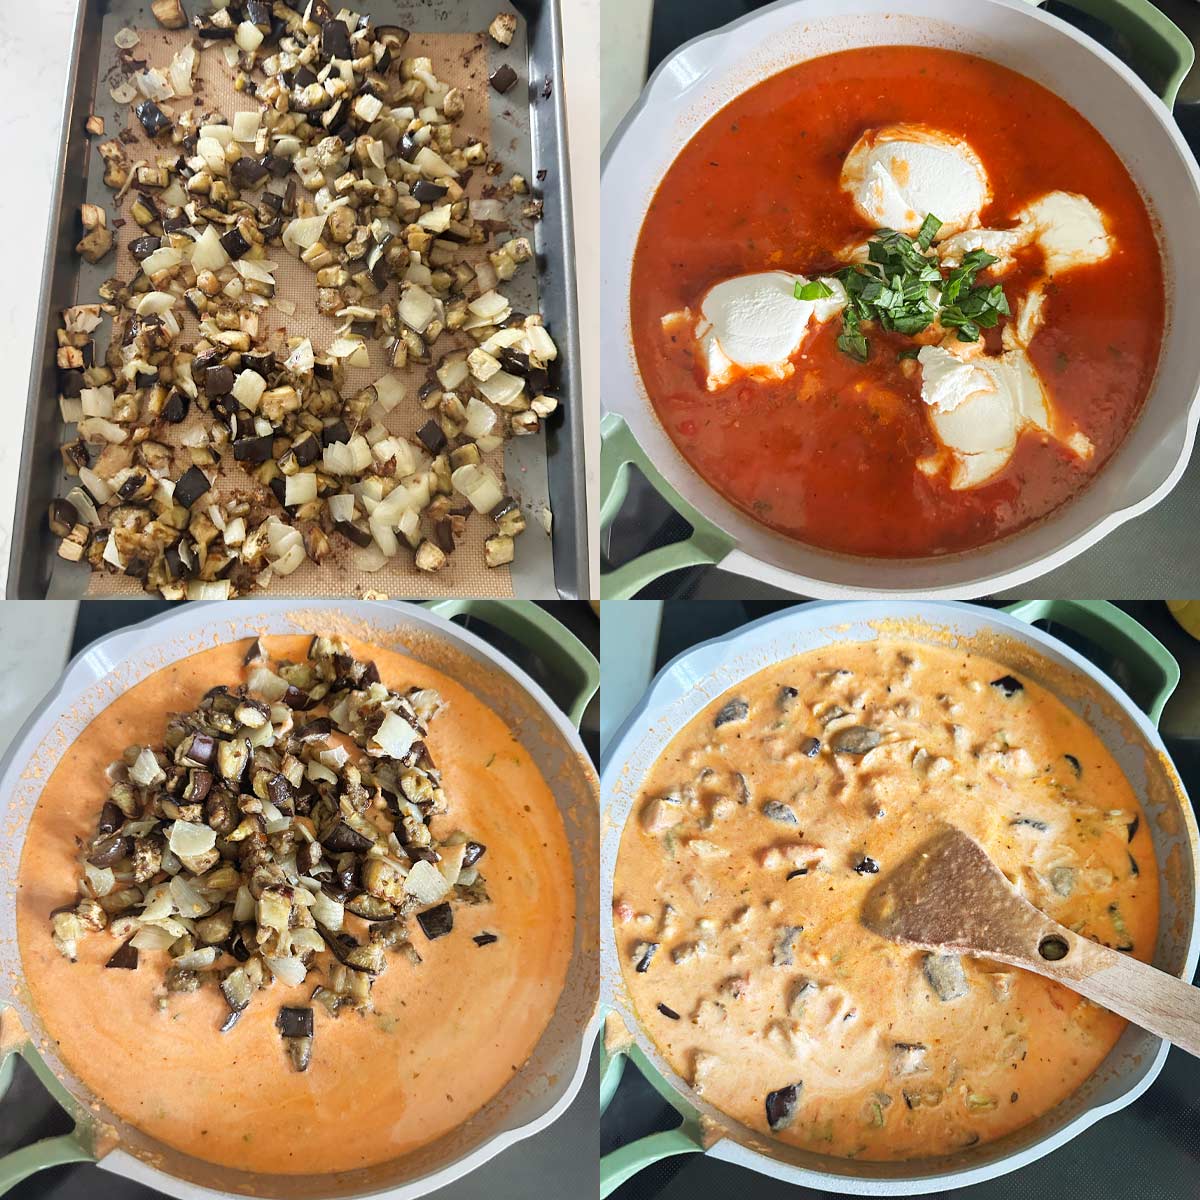 4 process photos of eggplant roasting and 3 stages of making a tomato sauce with ricotta, basil and roasted eggplant. 